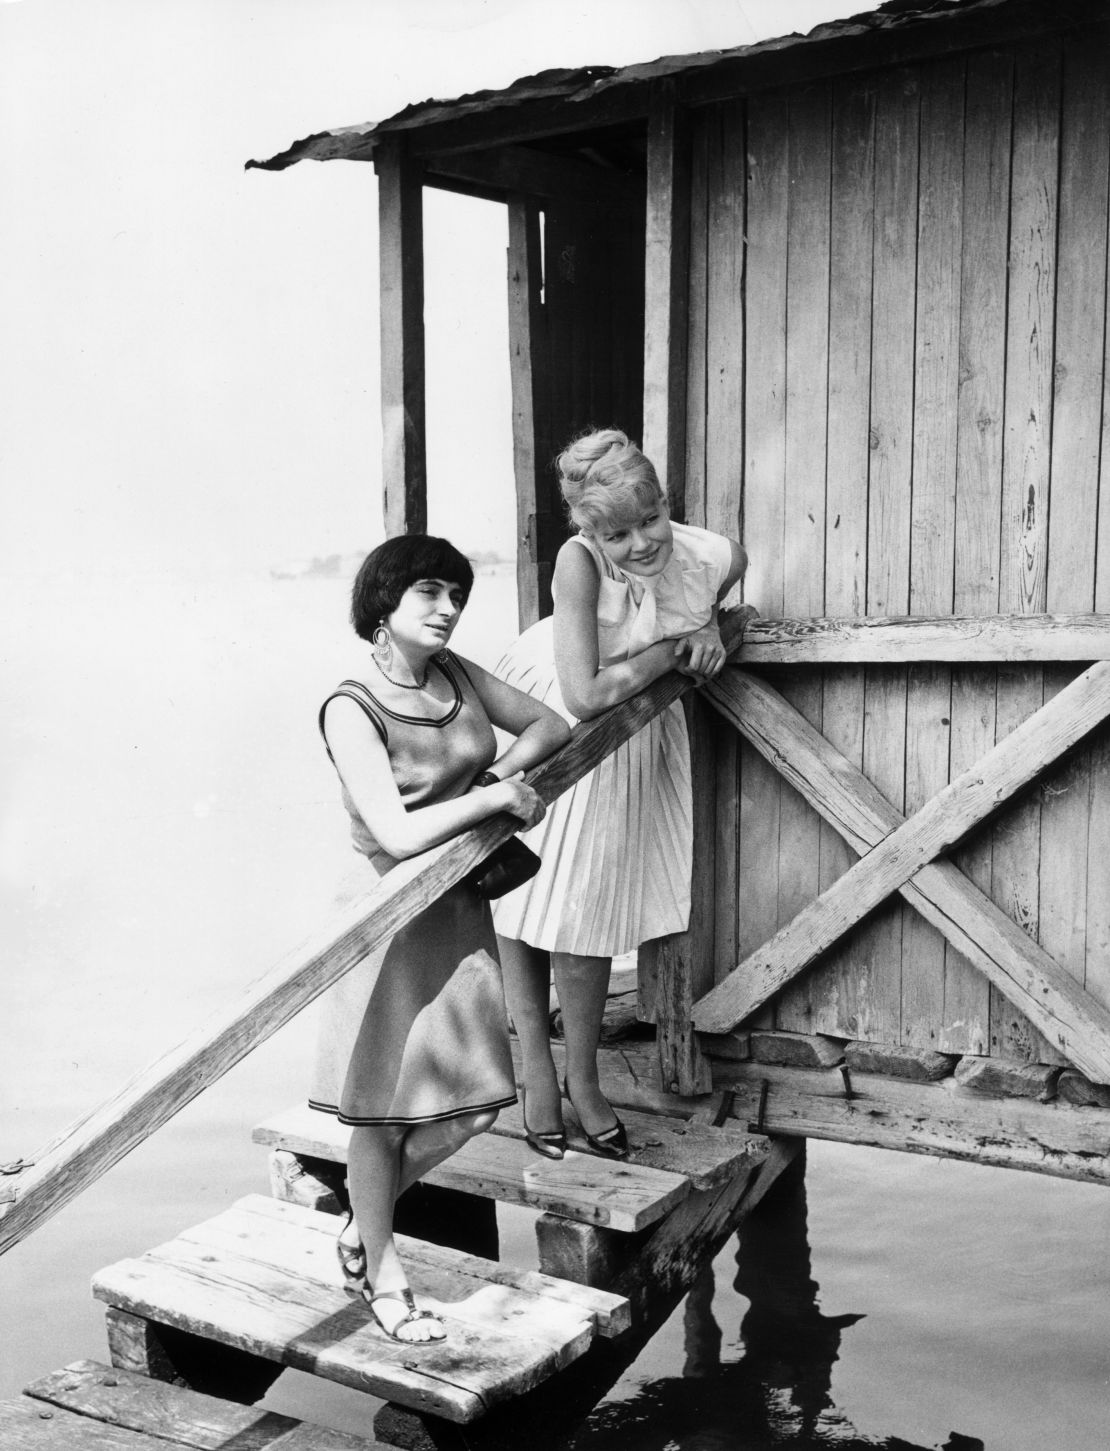 Agnes Varda (left) at the Venice Film Festival in 1962 with Corinne Marchand, star of "Cléo from 5 to 7."